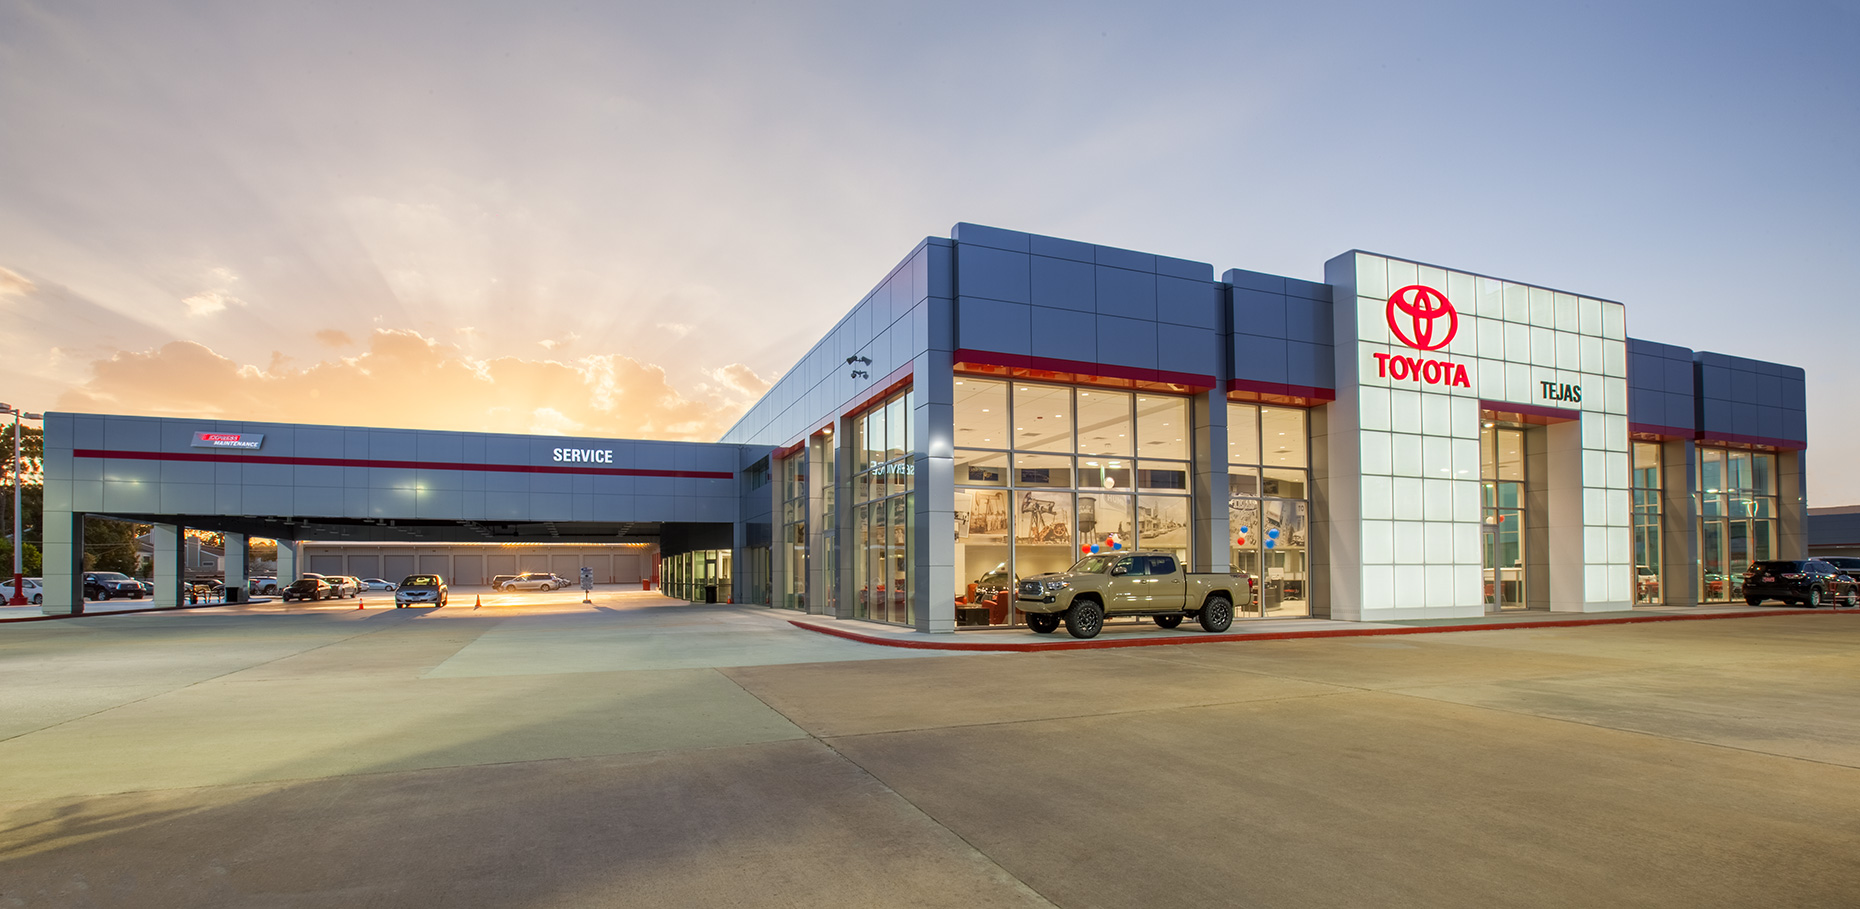 Tejas Toyota car dealership in Houston Texas by Top Ten architectural Photographers